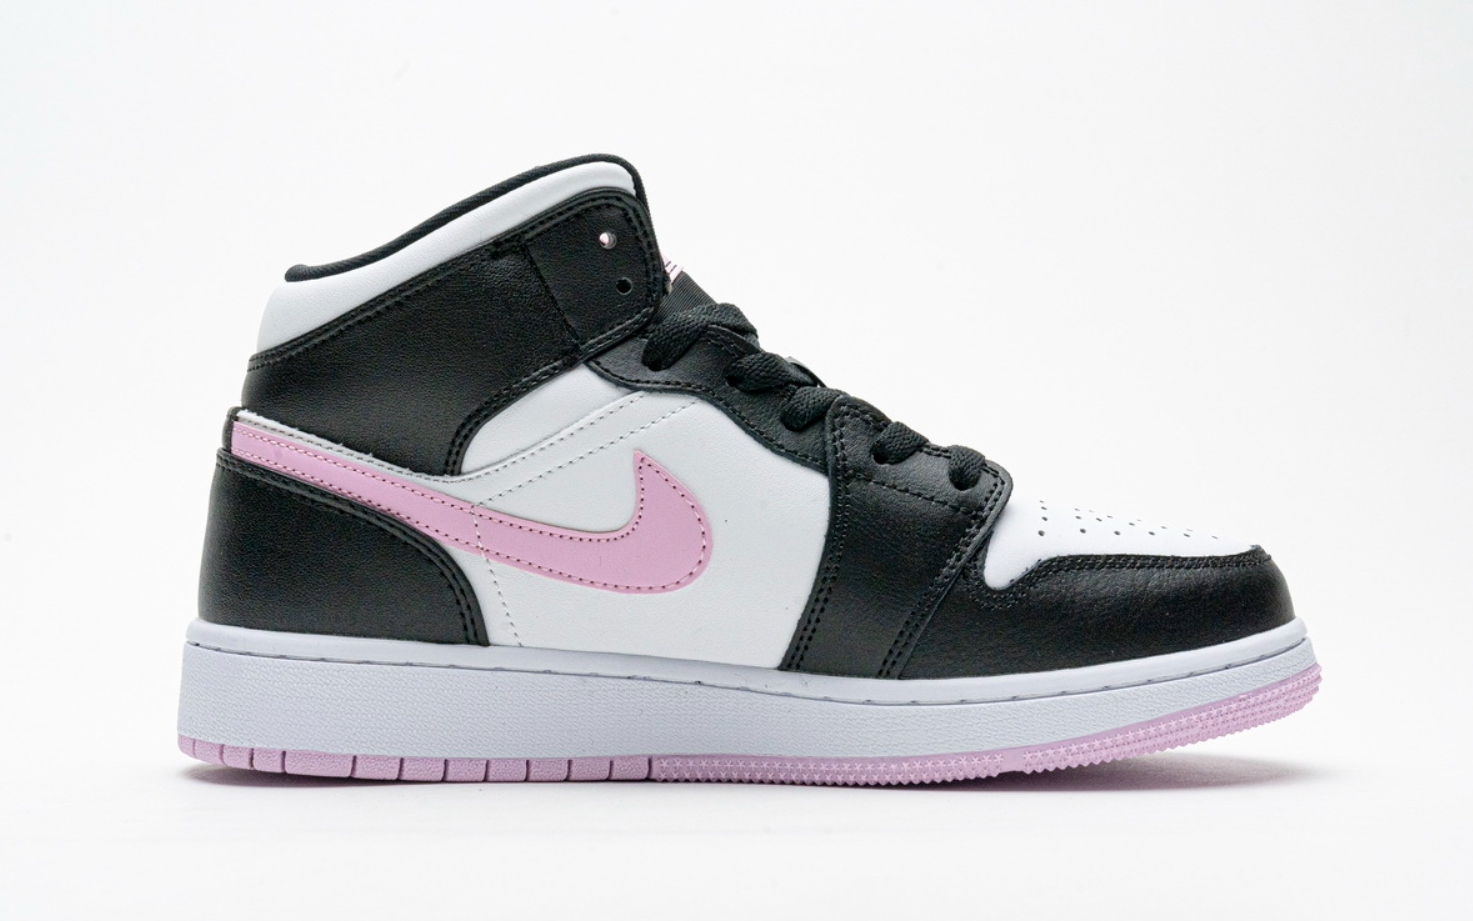 Replica Shoes Stores Where You Can Buy Air Jordan 1 Mid White Black Light Arctic Pink